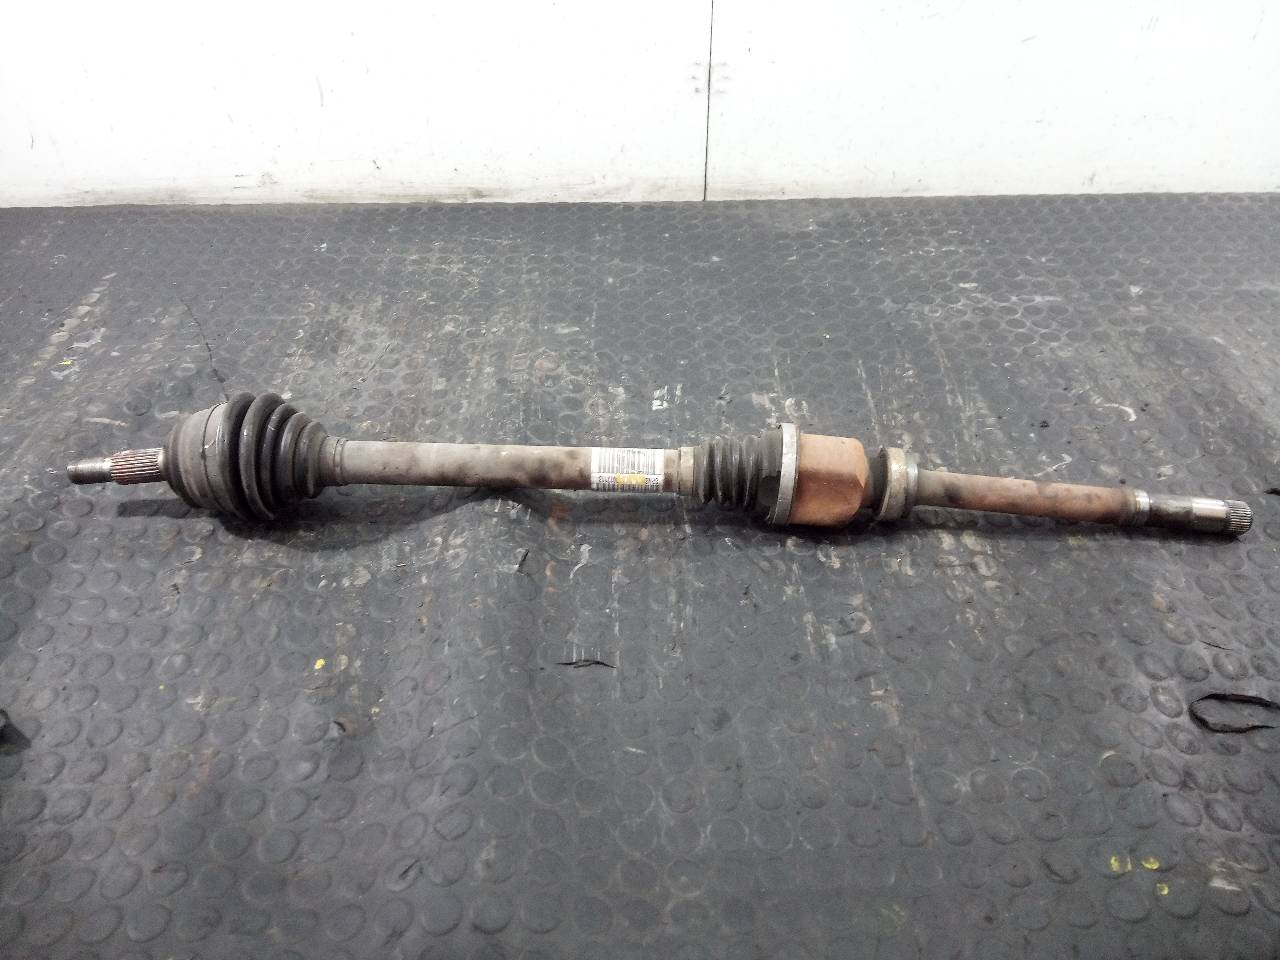 CITROËN C4 Picasso 2 generation (2013-2018) Front Right Driveshaft 9677916180, P1-B6-12 24047056